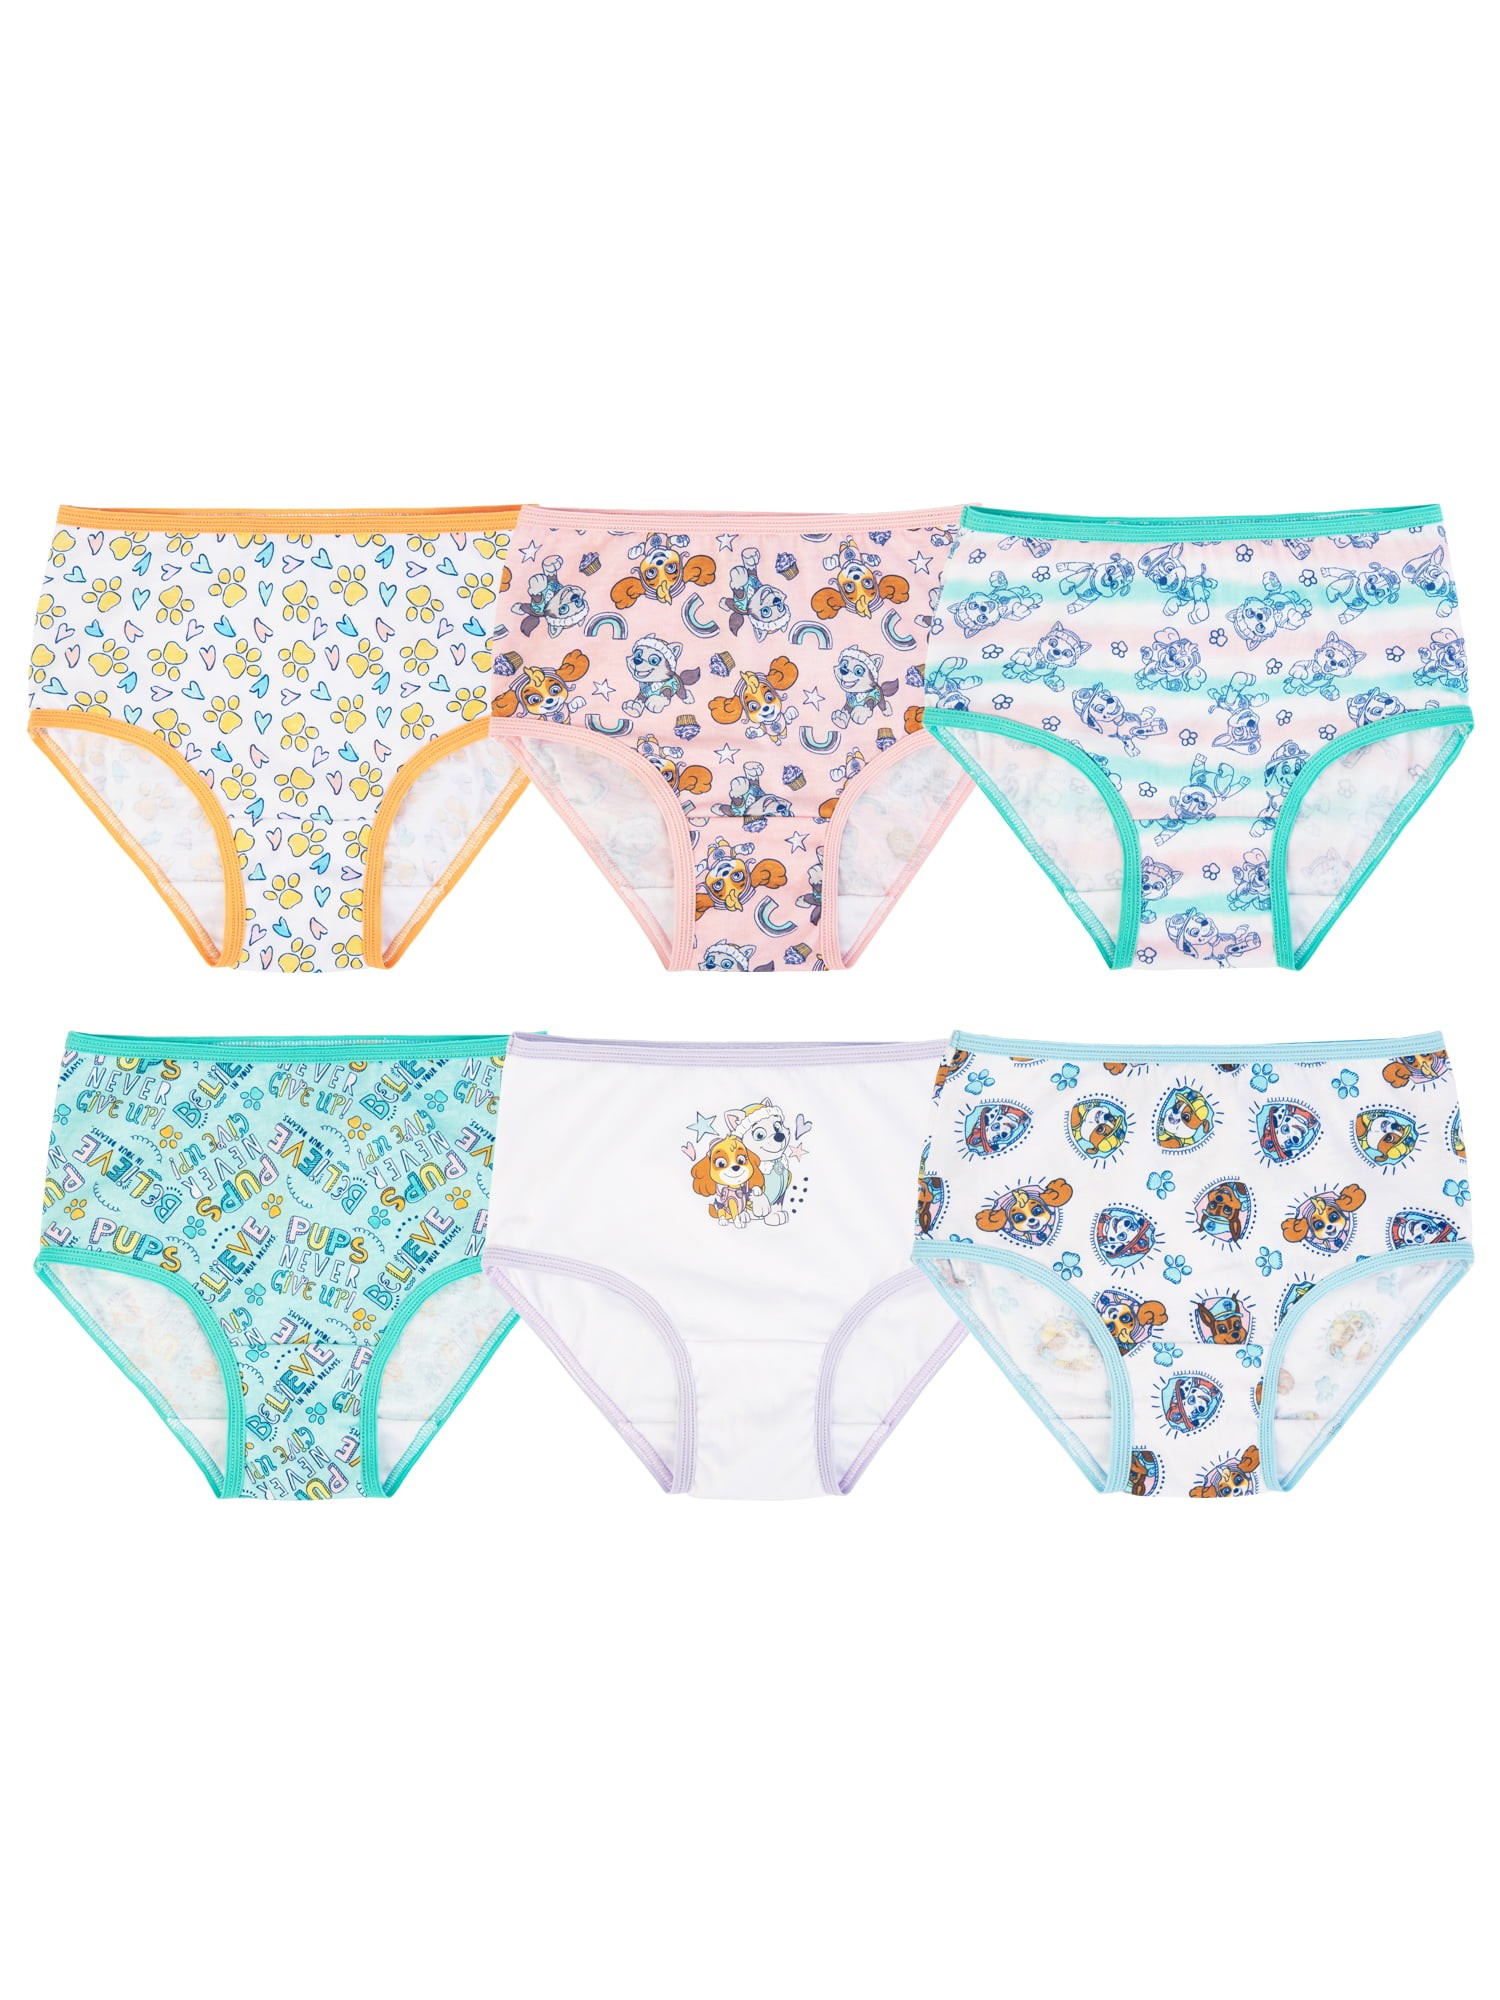 Peppa Pig Toddler Girl Briefs 7-Pack, Sizes 2T-4T